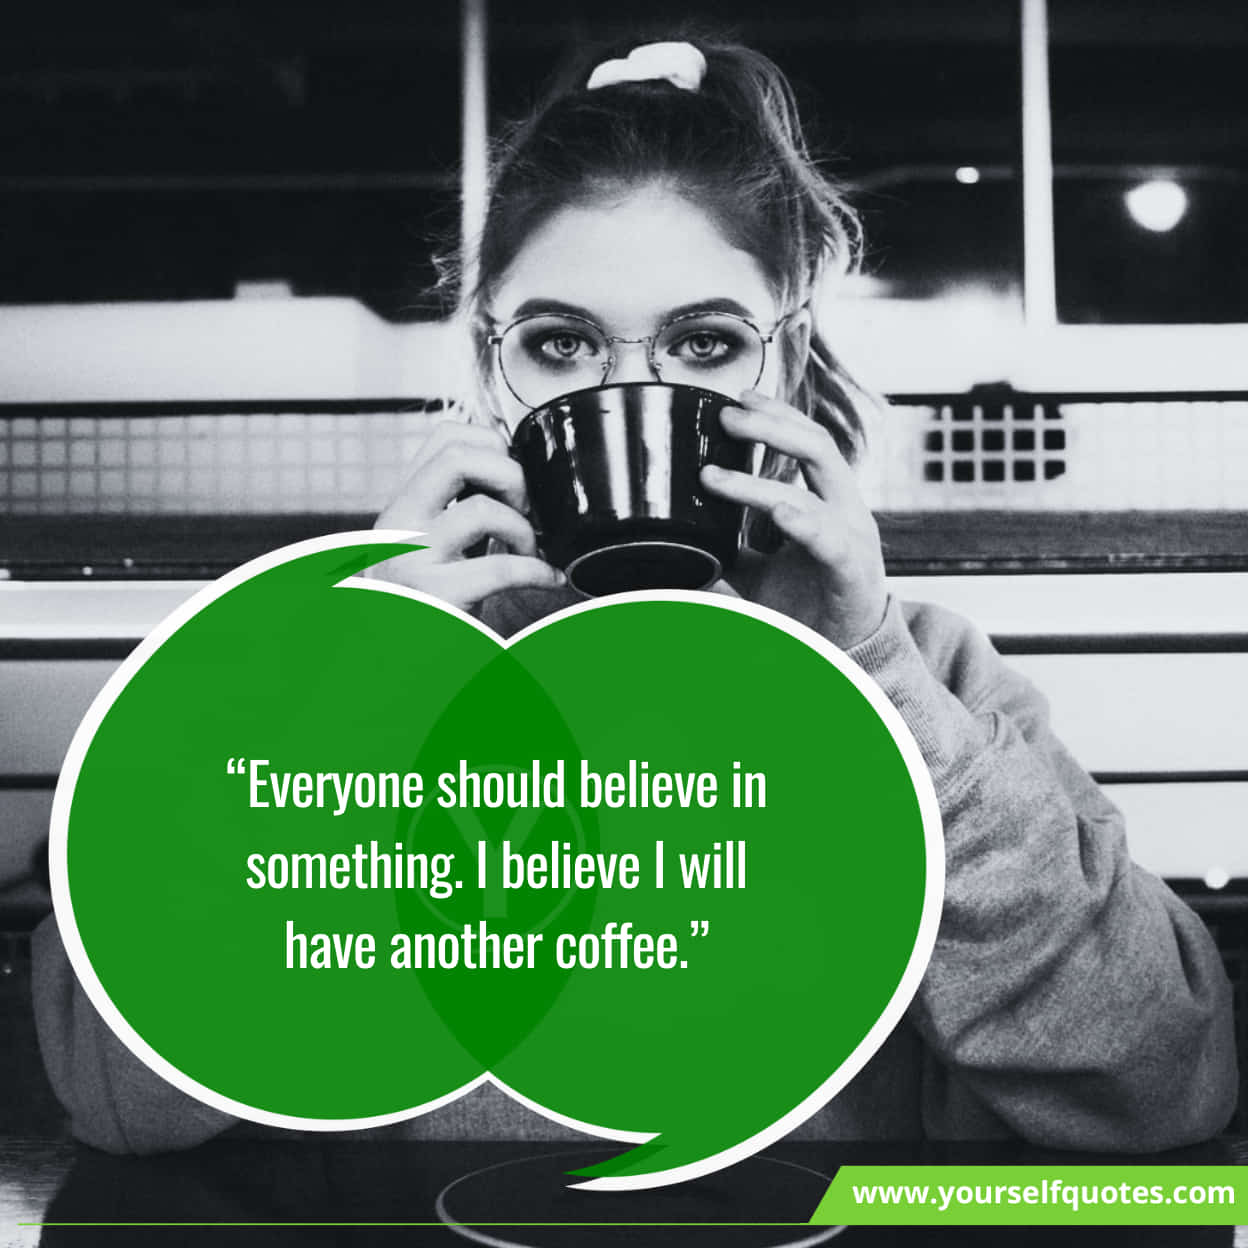 Best Inspiring Quotes About Coffee